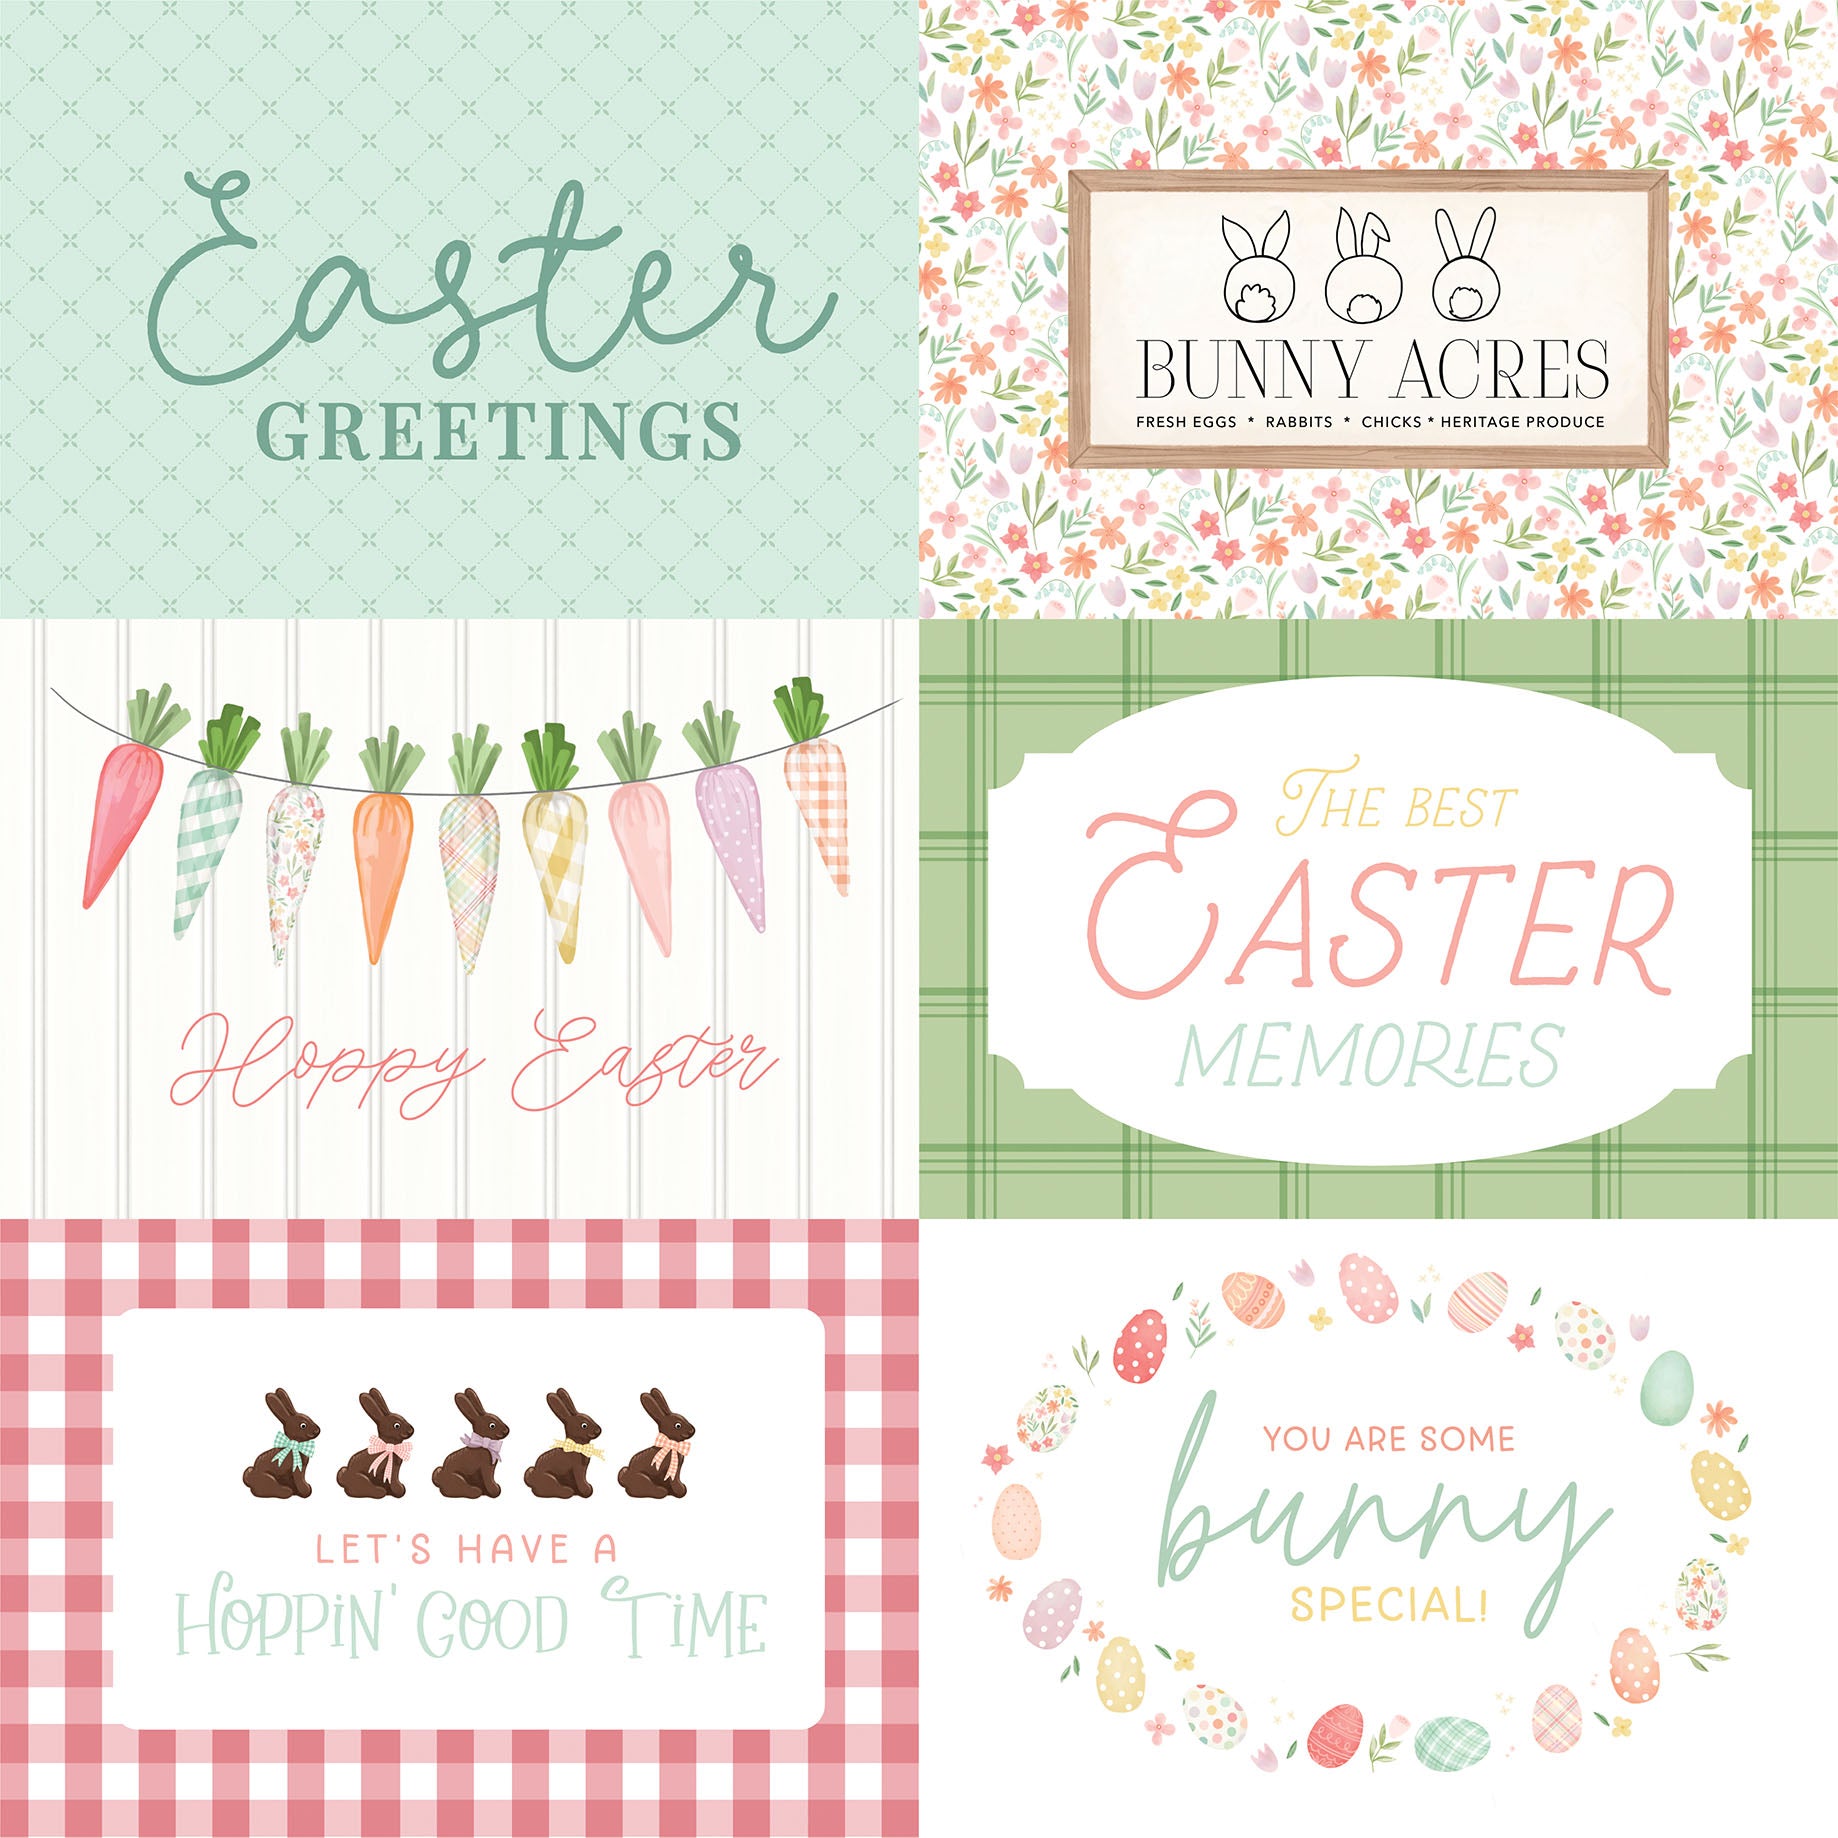 Here Comes Easter Collection 6x4 Journaling Cards 12 x 12 Double-Sided Scrapbook Paper by Carta Bella